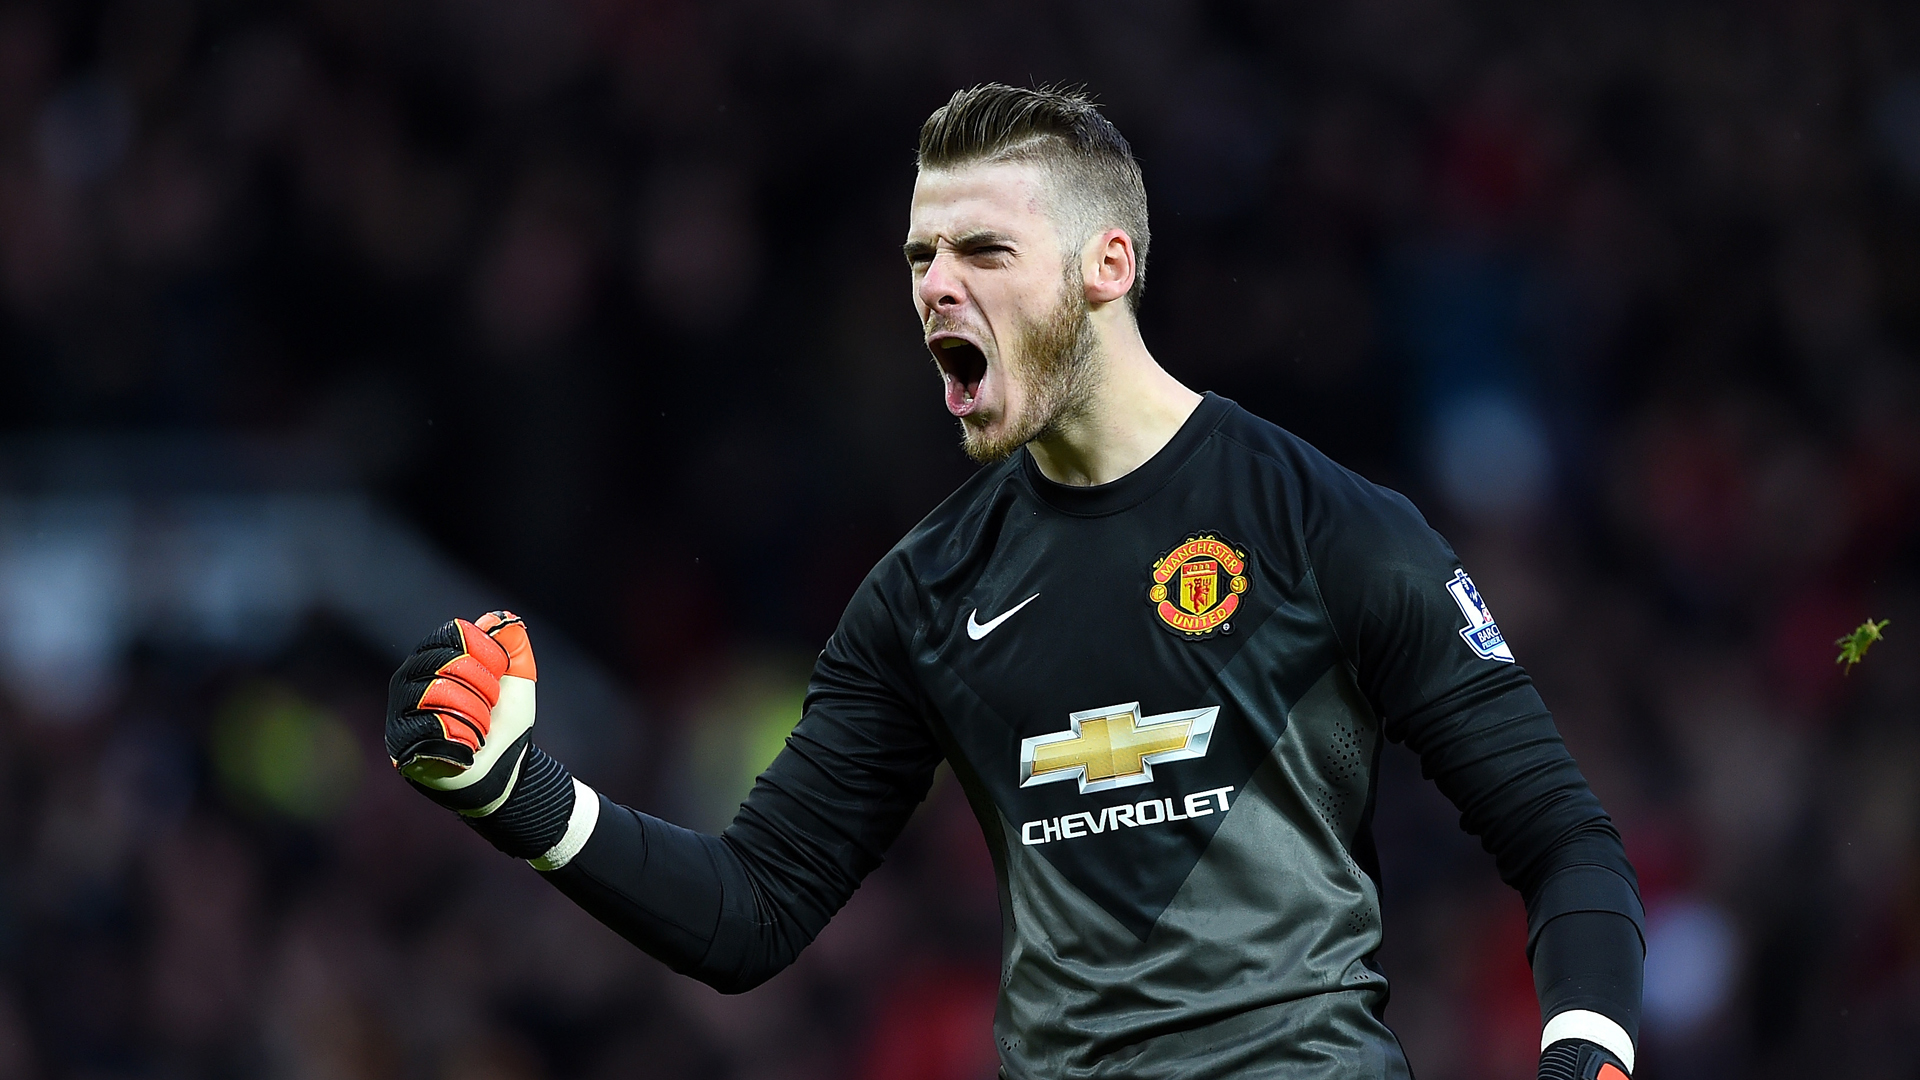 World Class: De Gea has established himself as one of the best GK's in the world this season